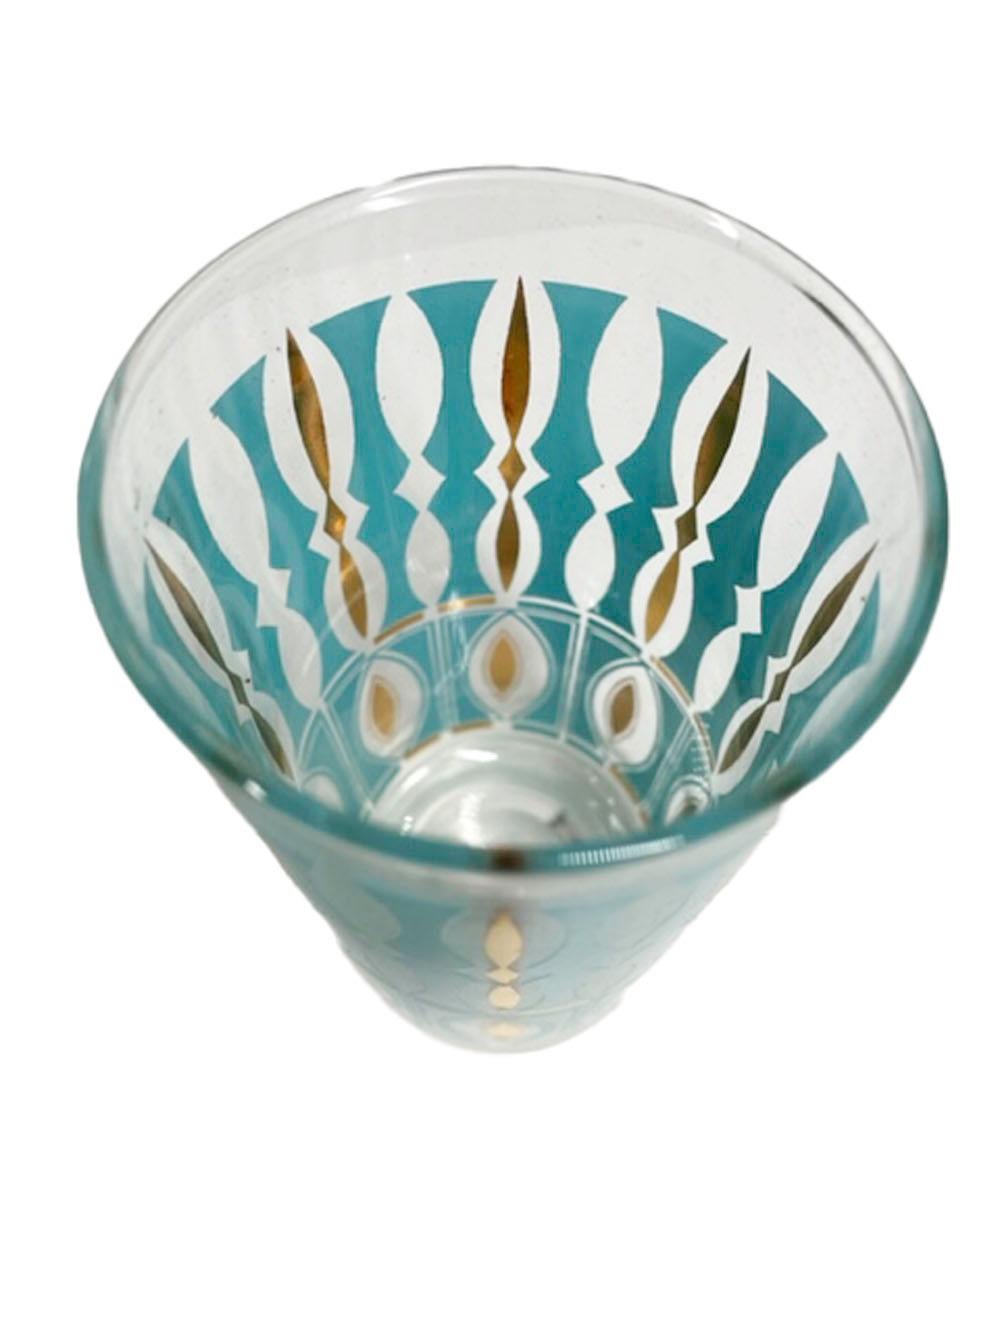 Eight Mid-Century Modern highball glasses by Anchor-Hocking with aqua enamel in a balustrade pattern with 22 karat gold conforming to the spaces between the balusters.